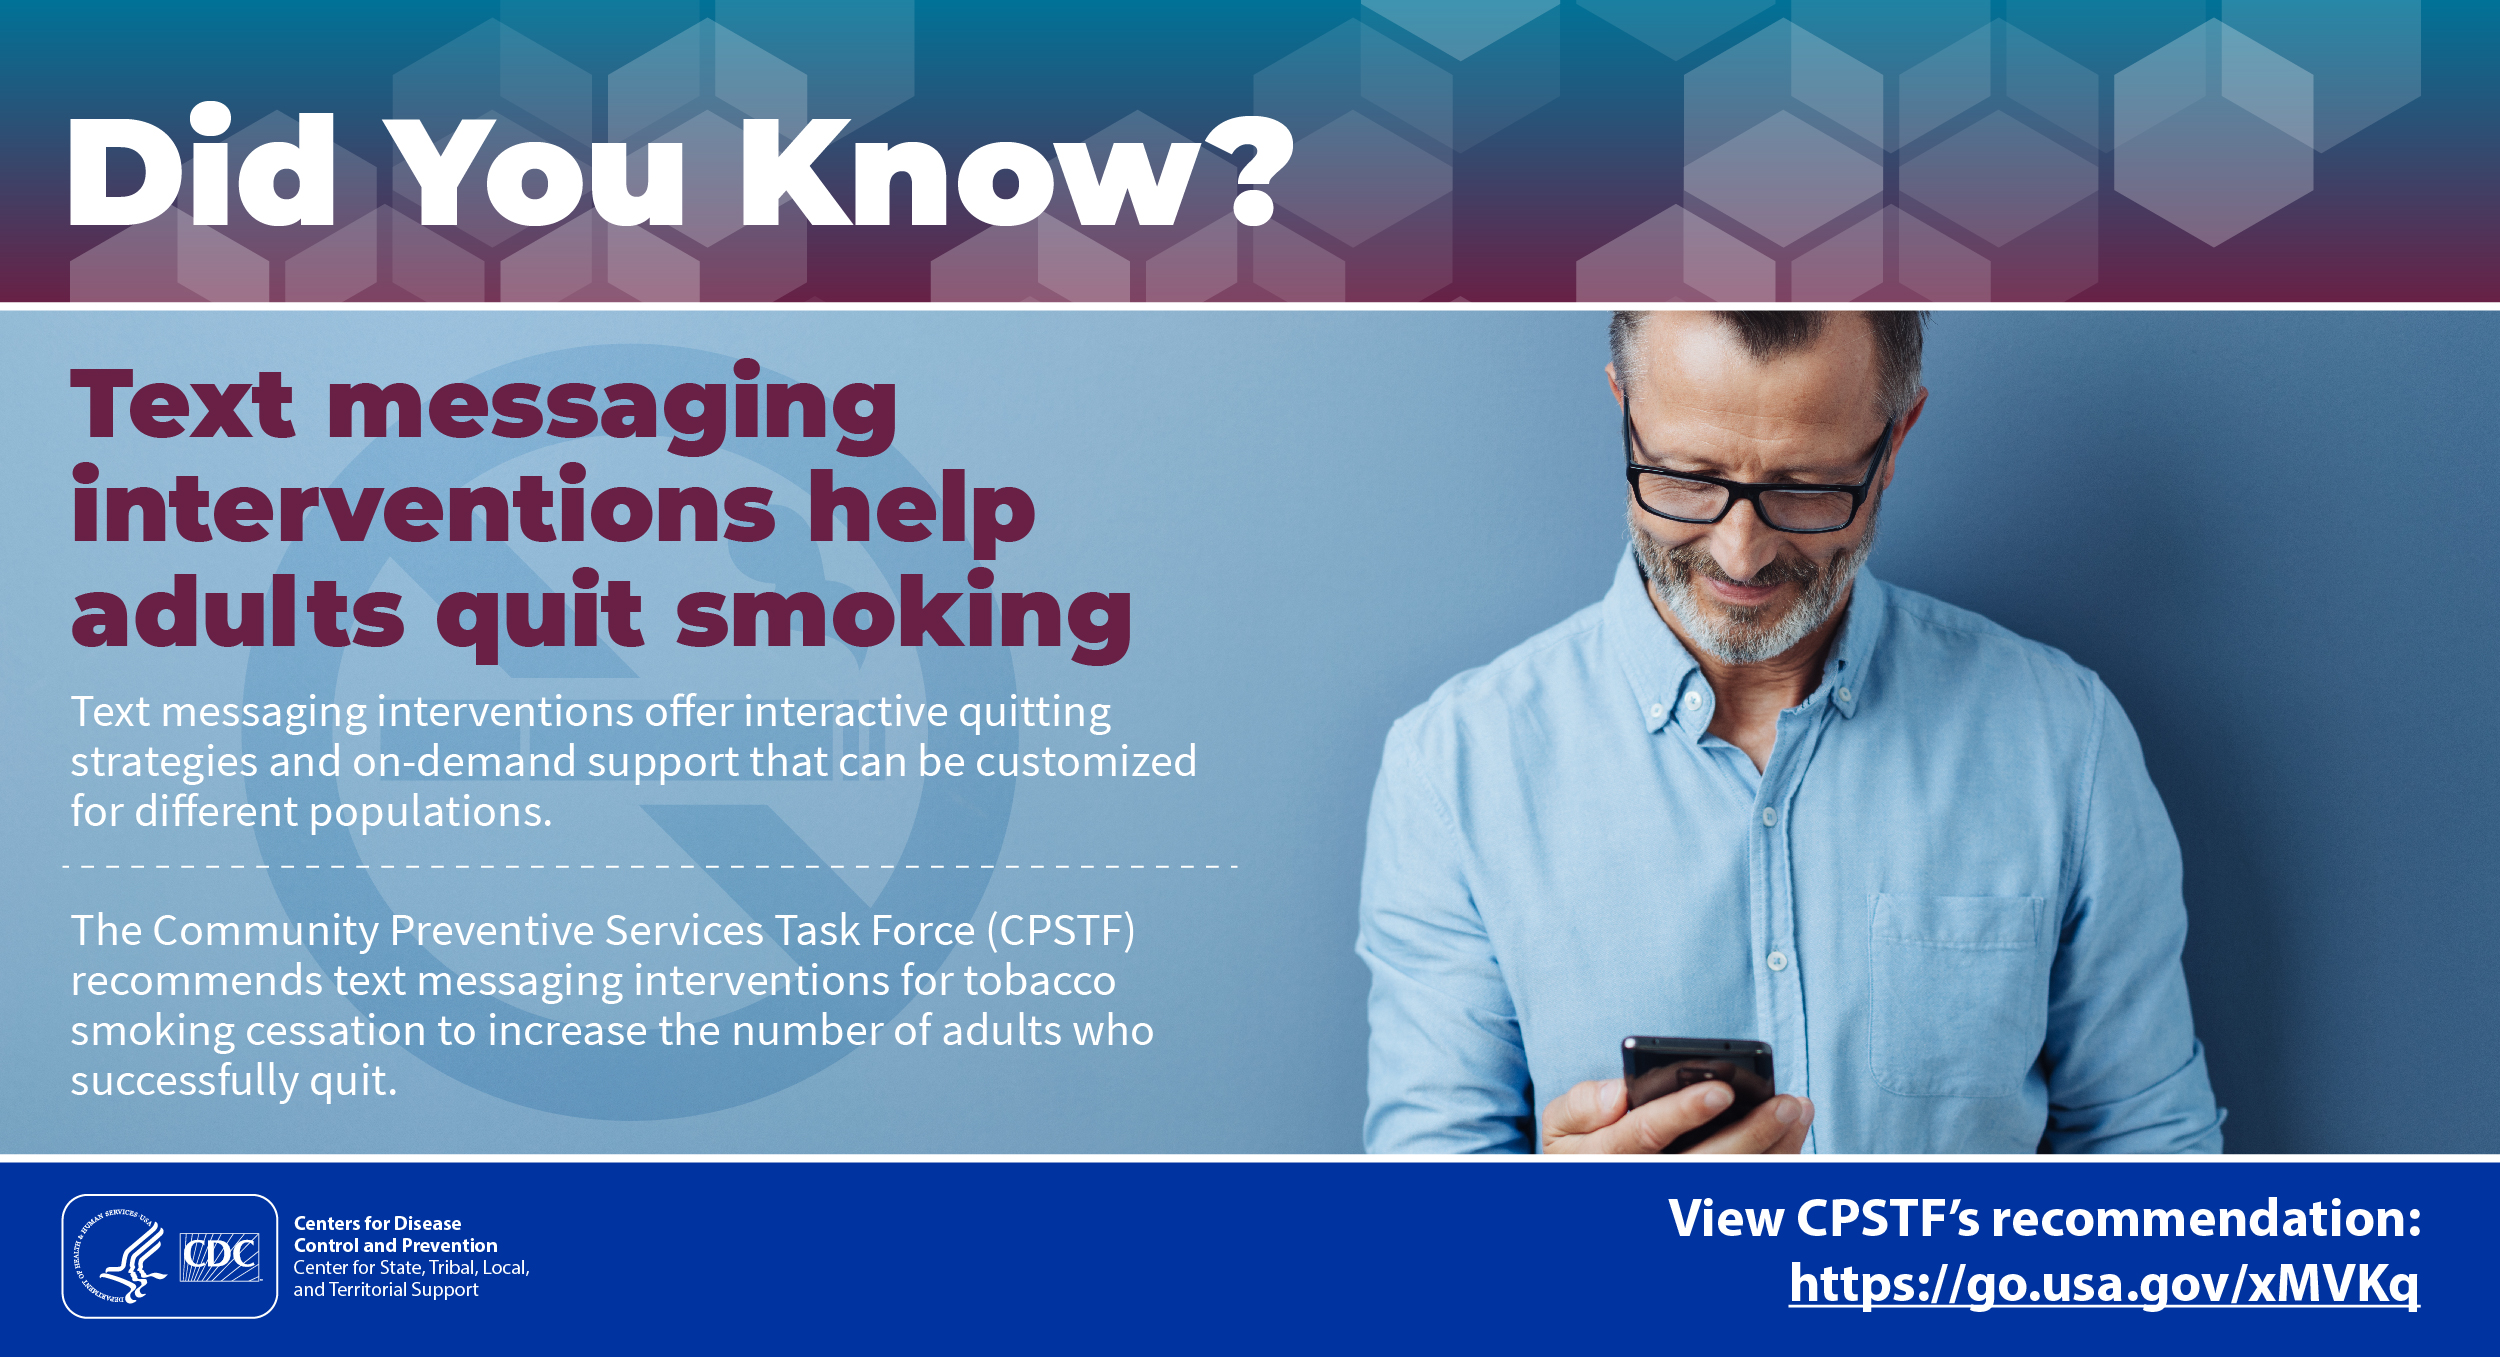 Did You Know? Text messaging interventions help adults quit smoking. Text messaging interventions offer interactive quitting strategies and on-demand support that can be customized for different populations. The Community Preventive Services Task Force (CPSTF) recommends text messaging interventions for tobacco smoking cessation to increase the number of adults who successfully quit. View CPSTF's recommendation: https://go.usa.gov/xMVKq.